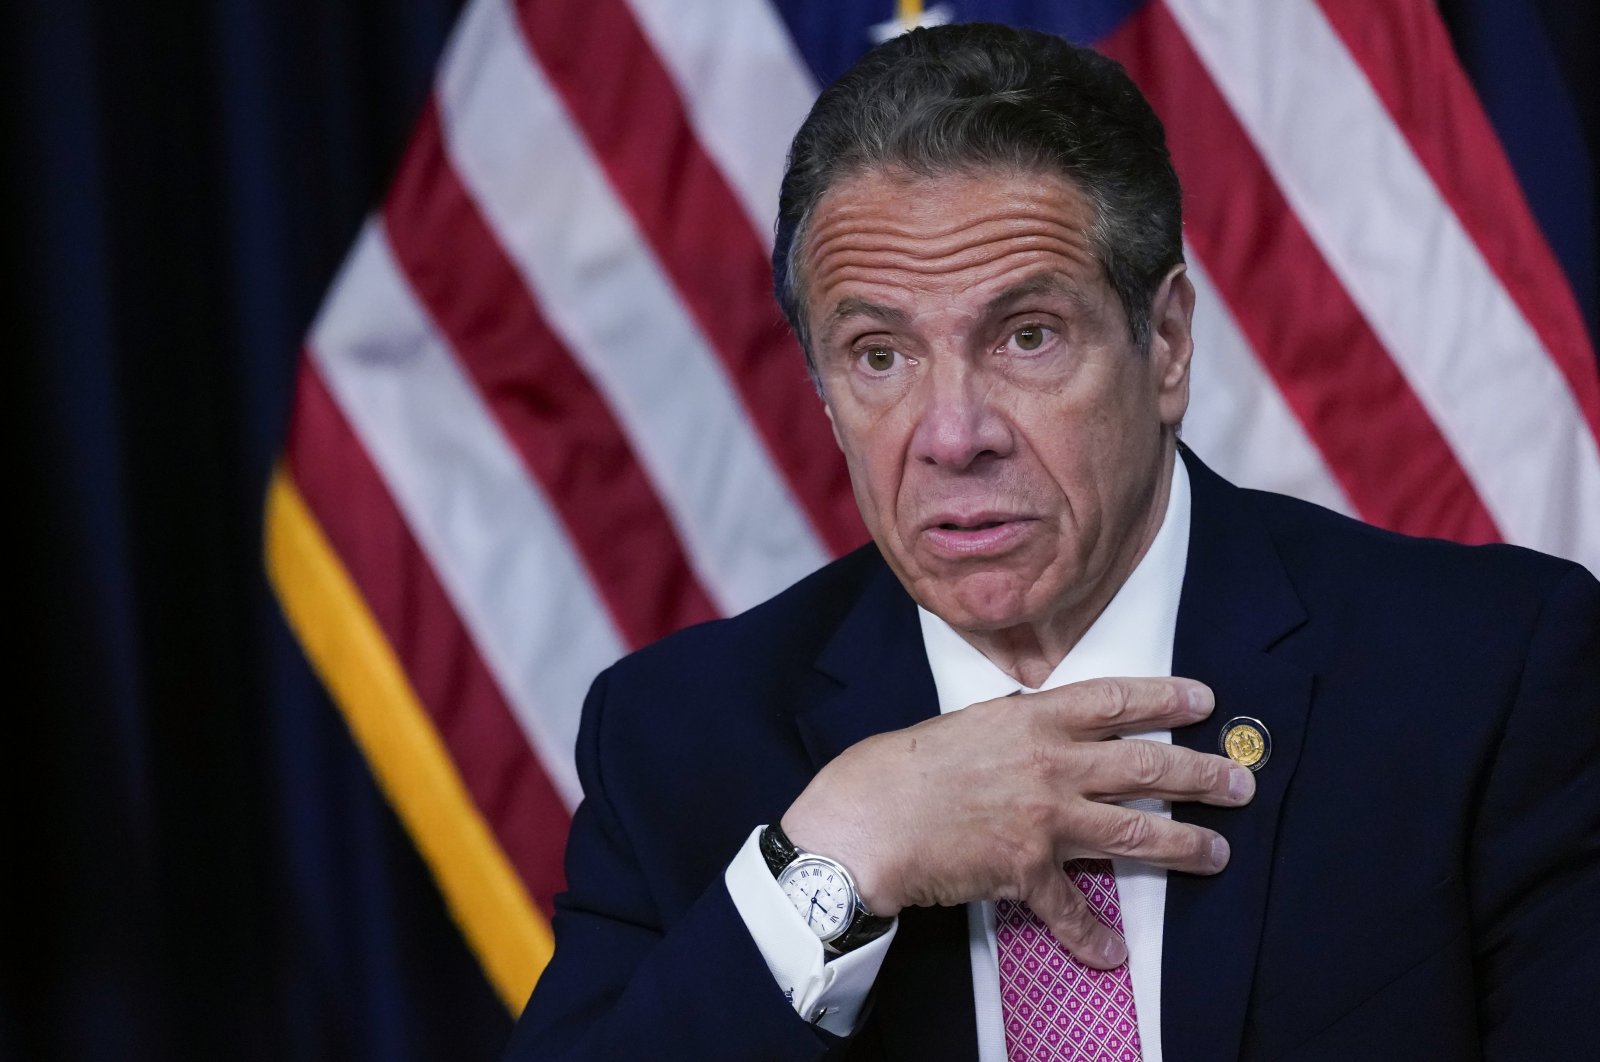 New York Gov. Andrew Cuomo speaks during a news conference in New York, N.Y., U.S., May 10, 2021. (AP Photo)